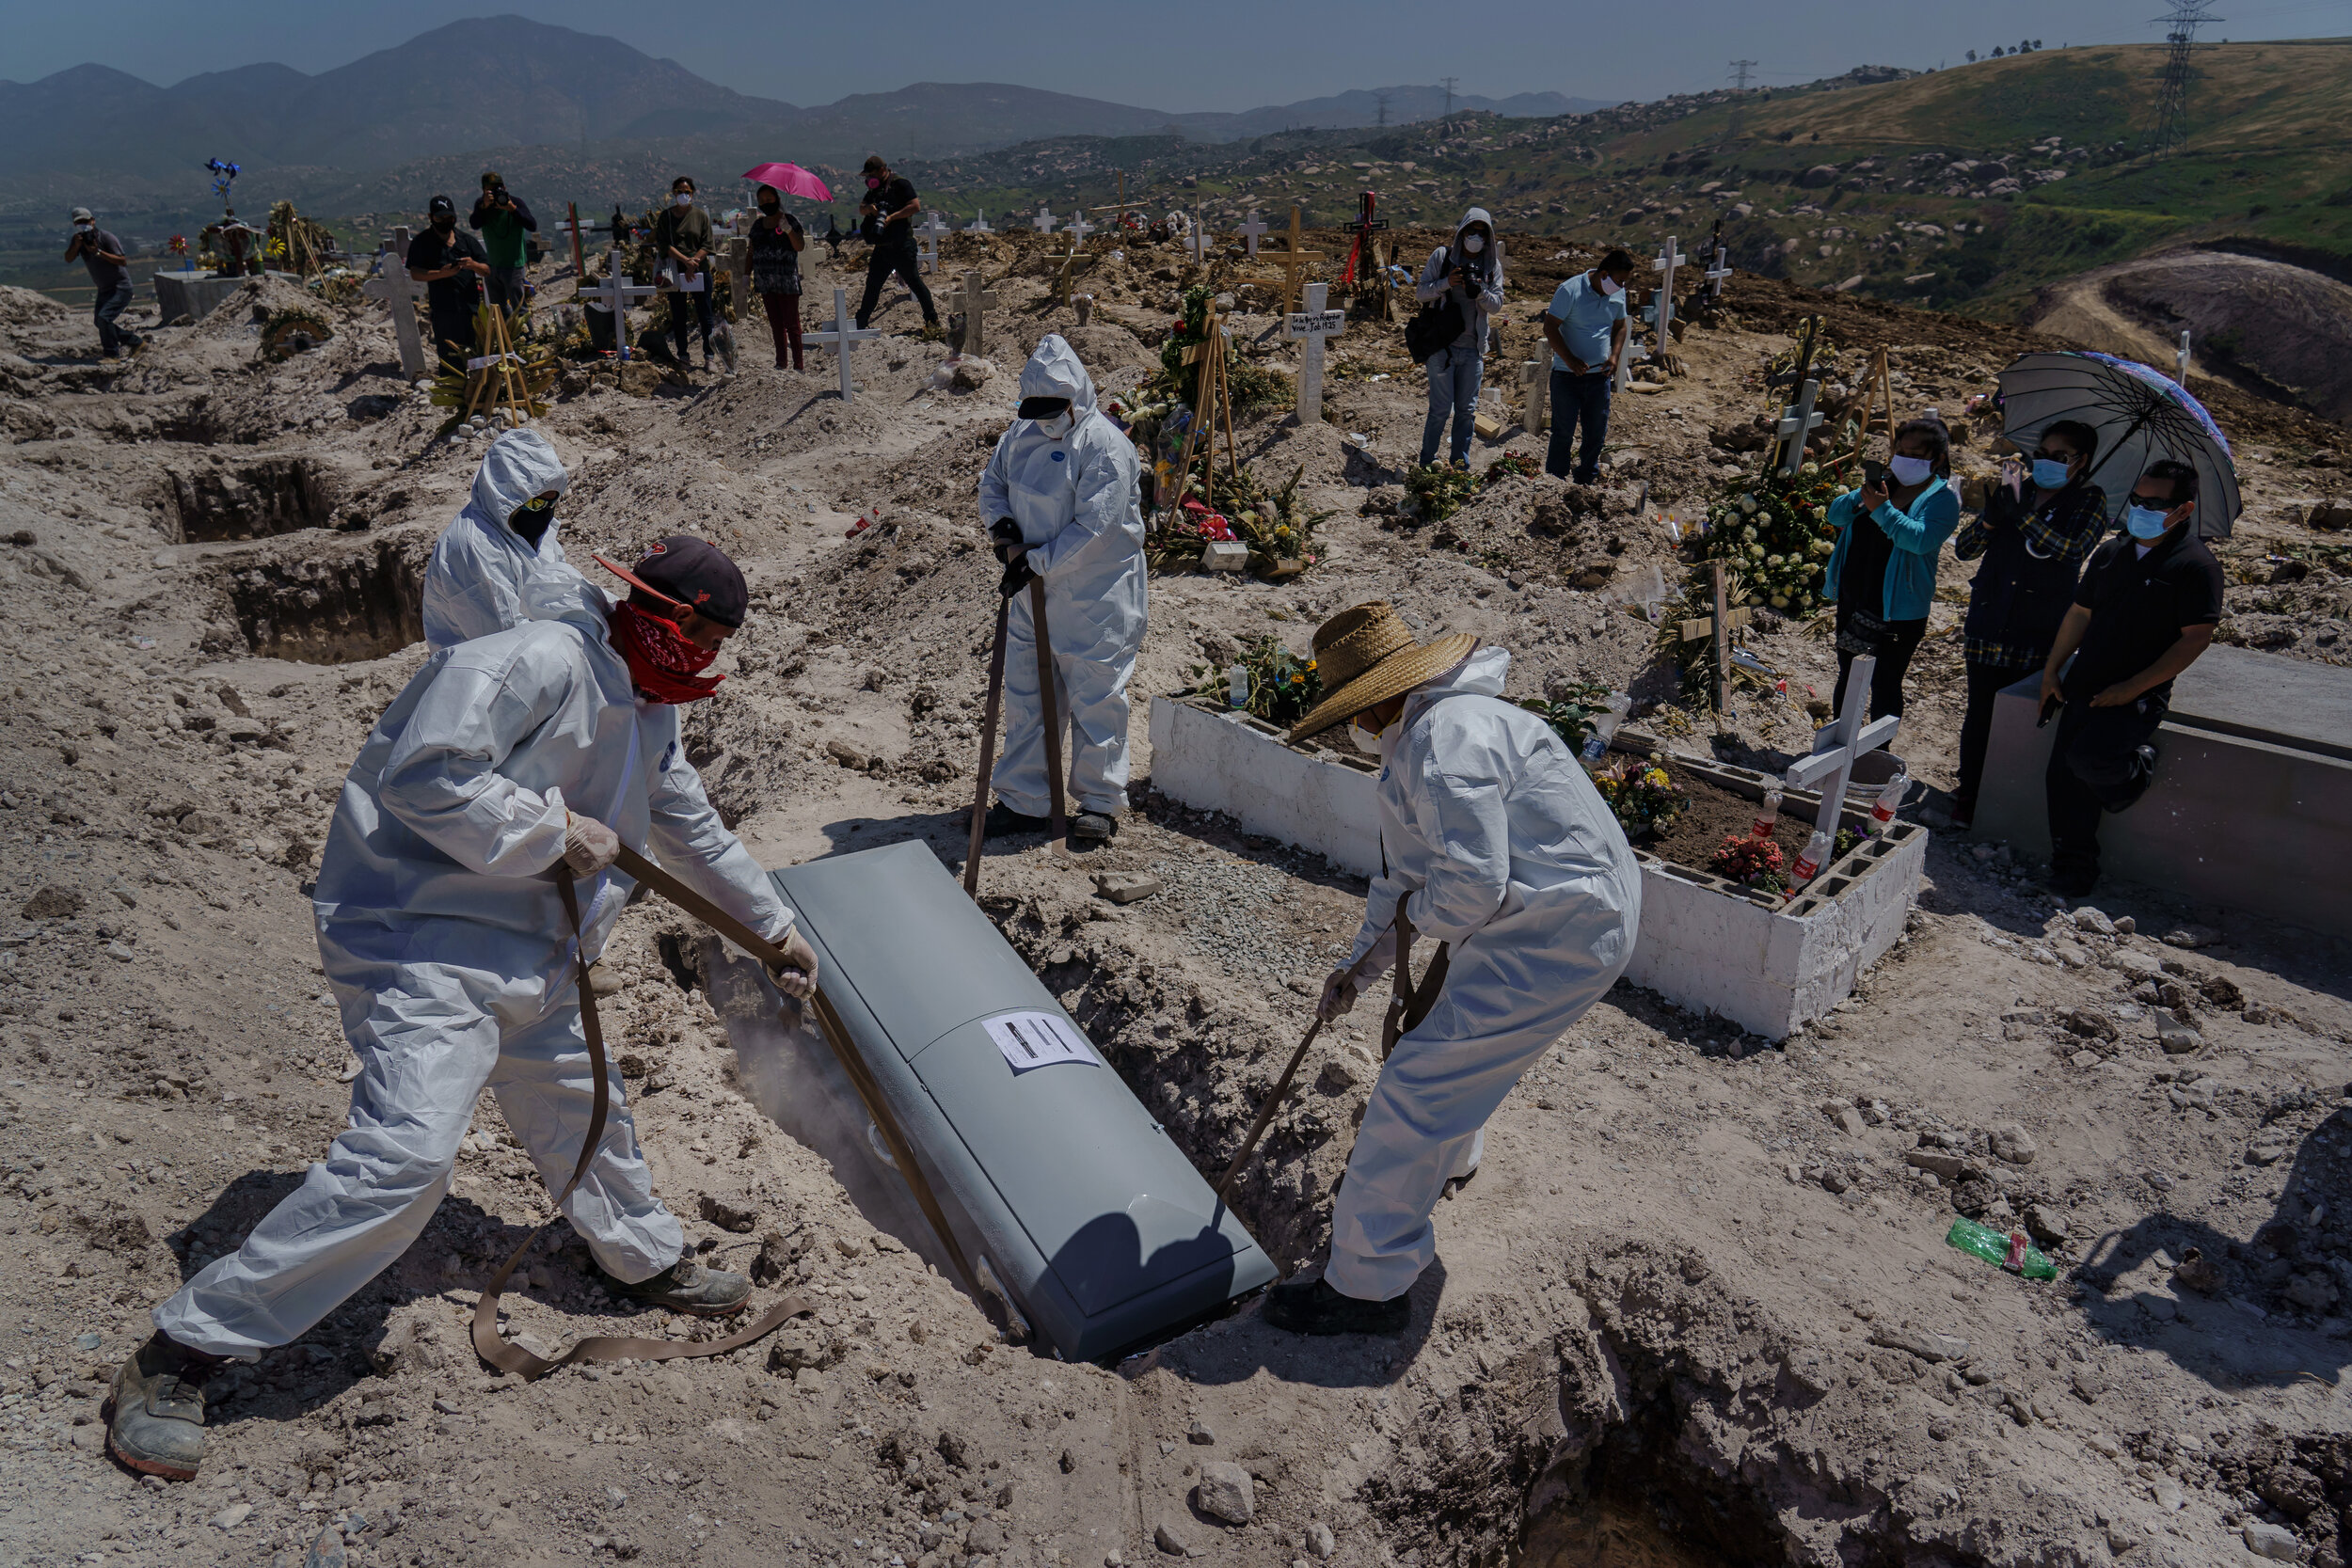  Cemetery workers lower the casket of Juan Velasco, who died of COVID-19 symptoms, as his family, to the right, watches the burial at the Municipal Pantheon 13 cemetery, in Tijuana, Mexico, on April 27, 2020. The coronavirus is killing so many people